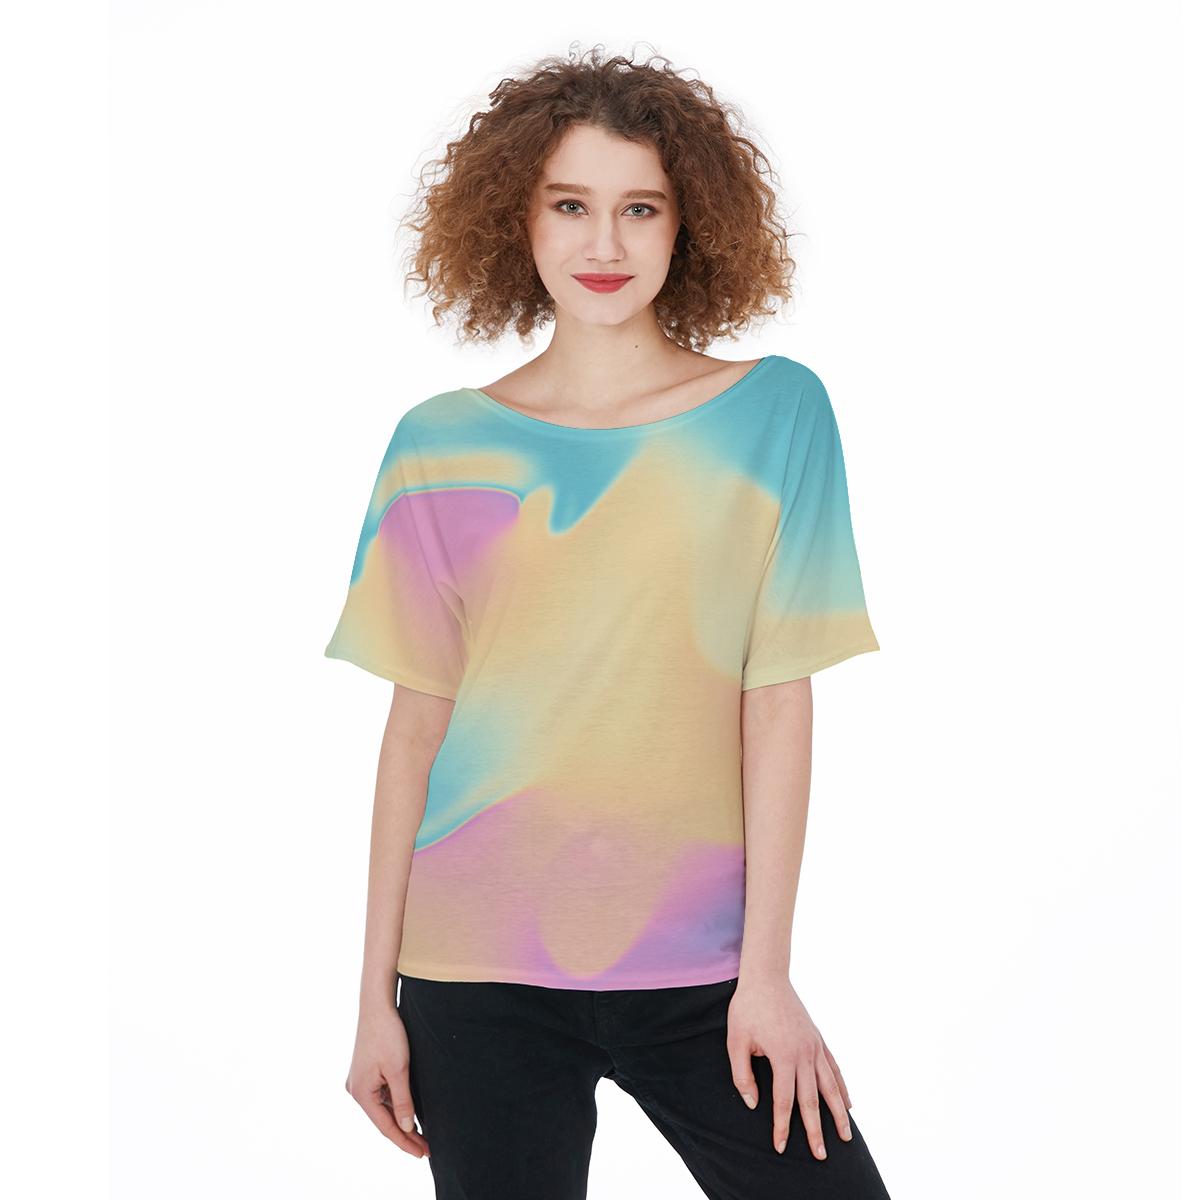 Abstract Cloud Holographic Iridescence Print Women's Top